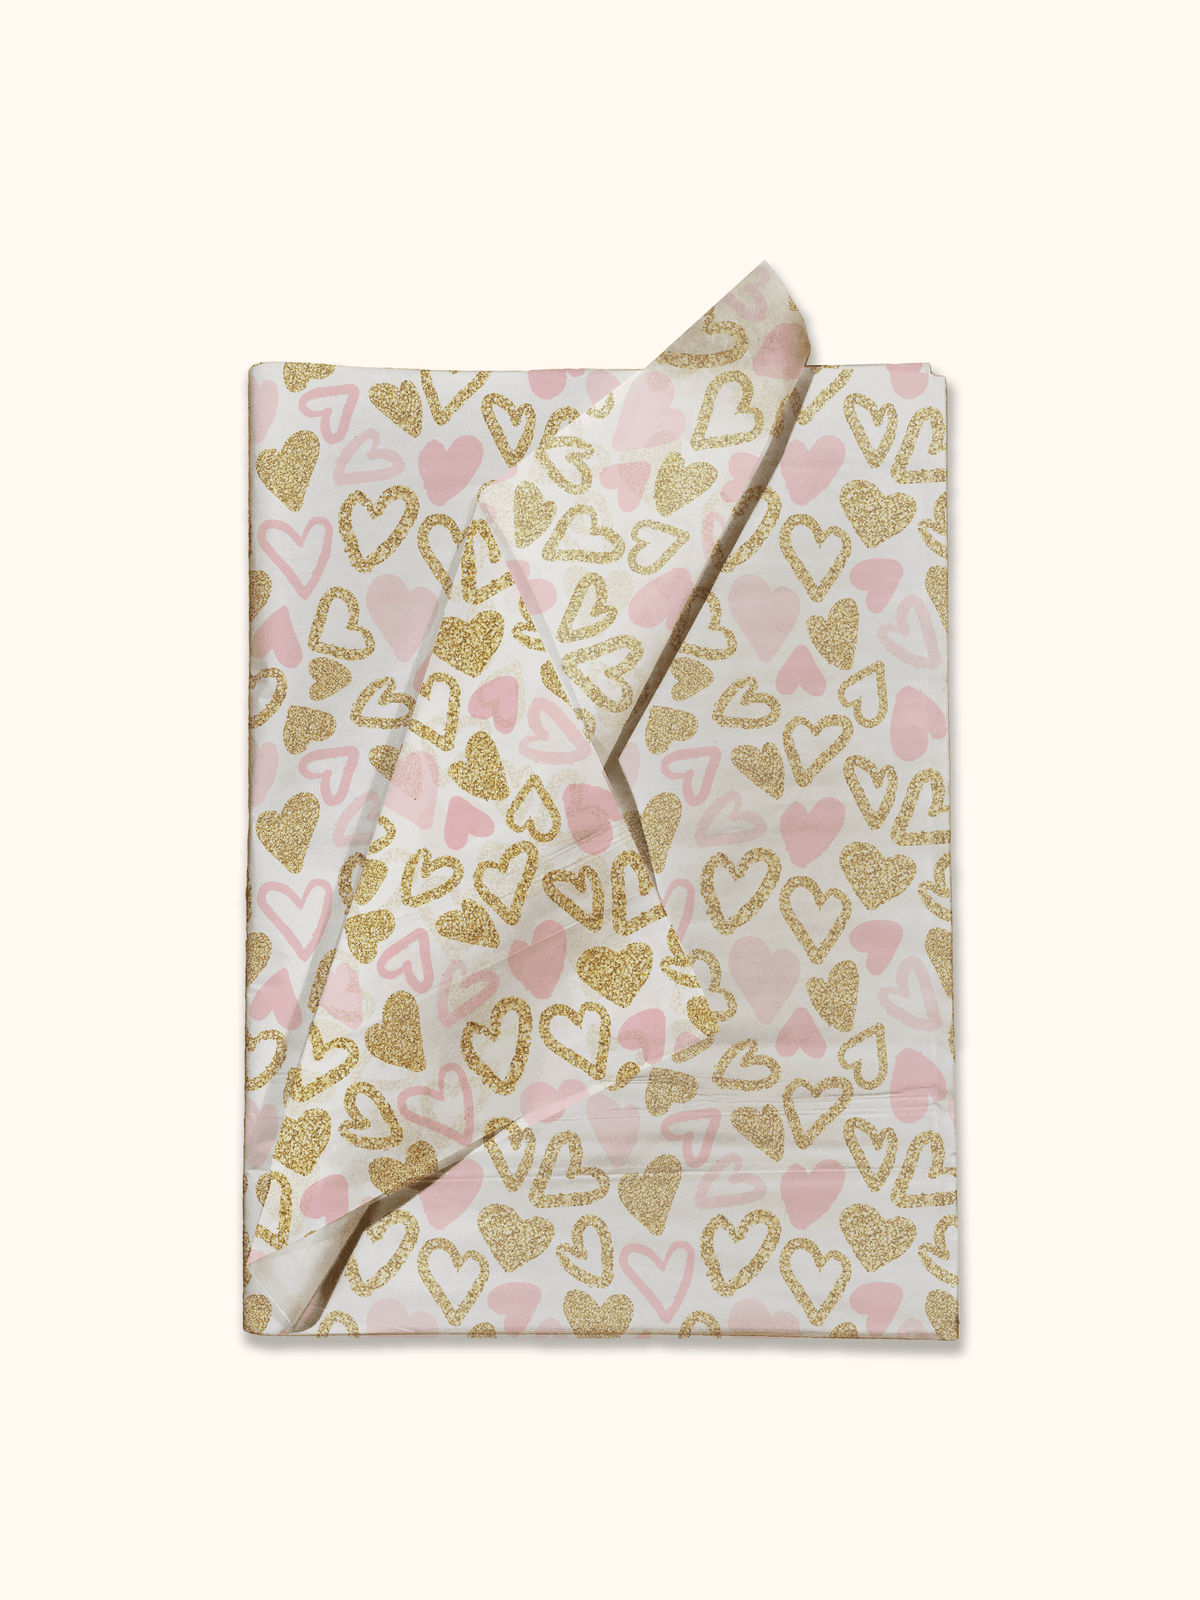 Pink and Gold Hearts Printed Tissue Paper Wrapping